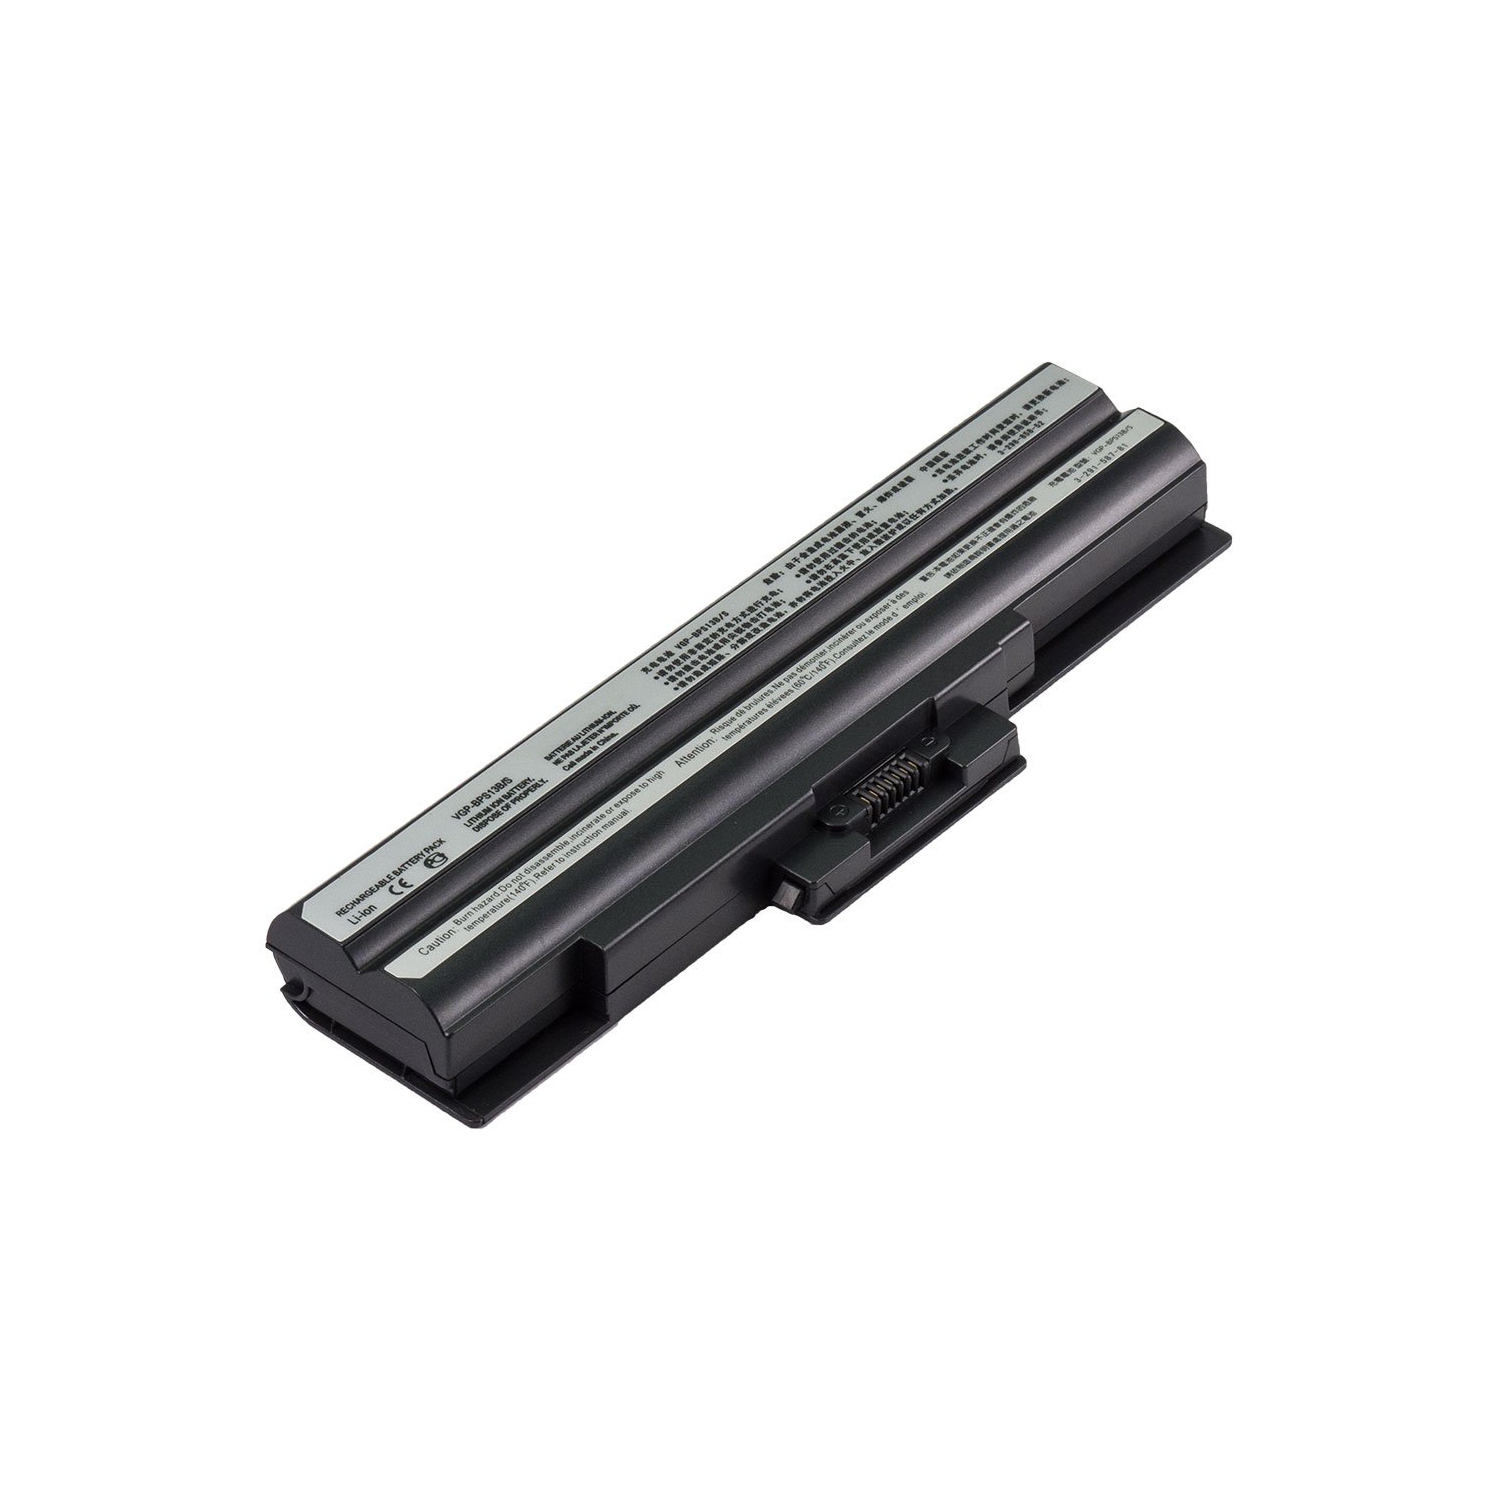 Laptop Battery Replacement for Sony VAIO VGN-CS118E/P, VGP-BPL13, VGP-BPS13/Q, VGP-BPS13A/B, VGP-BPS13A/S, VGP-BPS13A